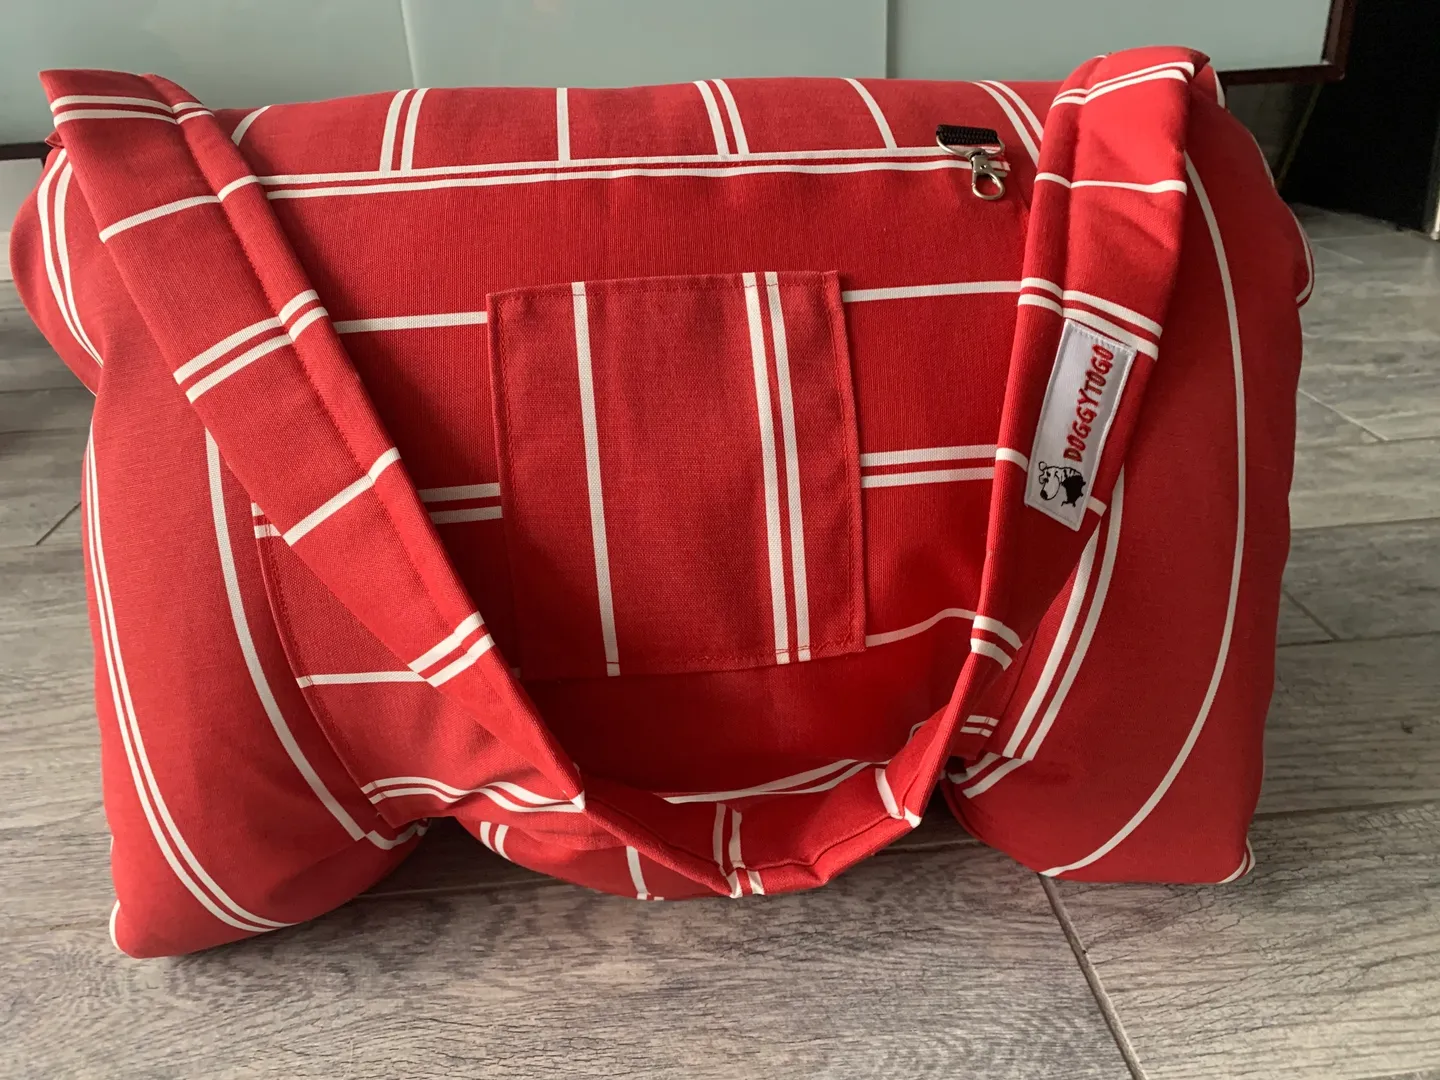 A red color dog bed bag with white stripes